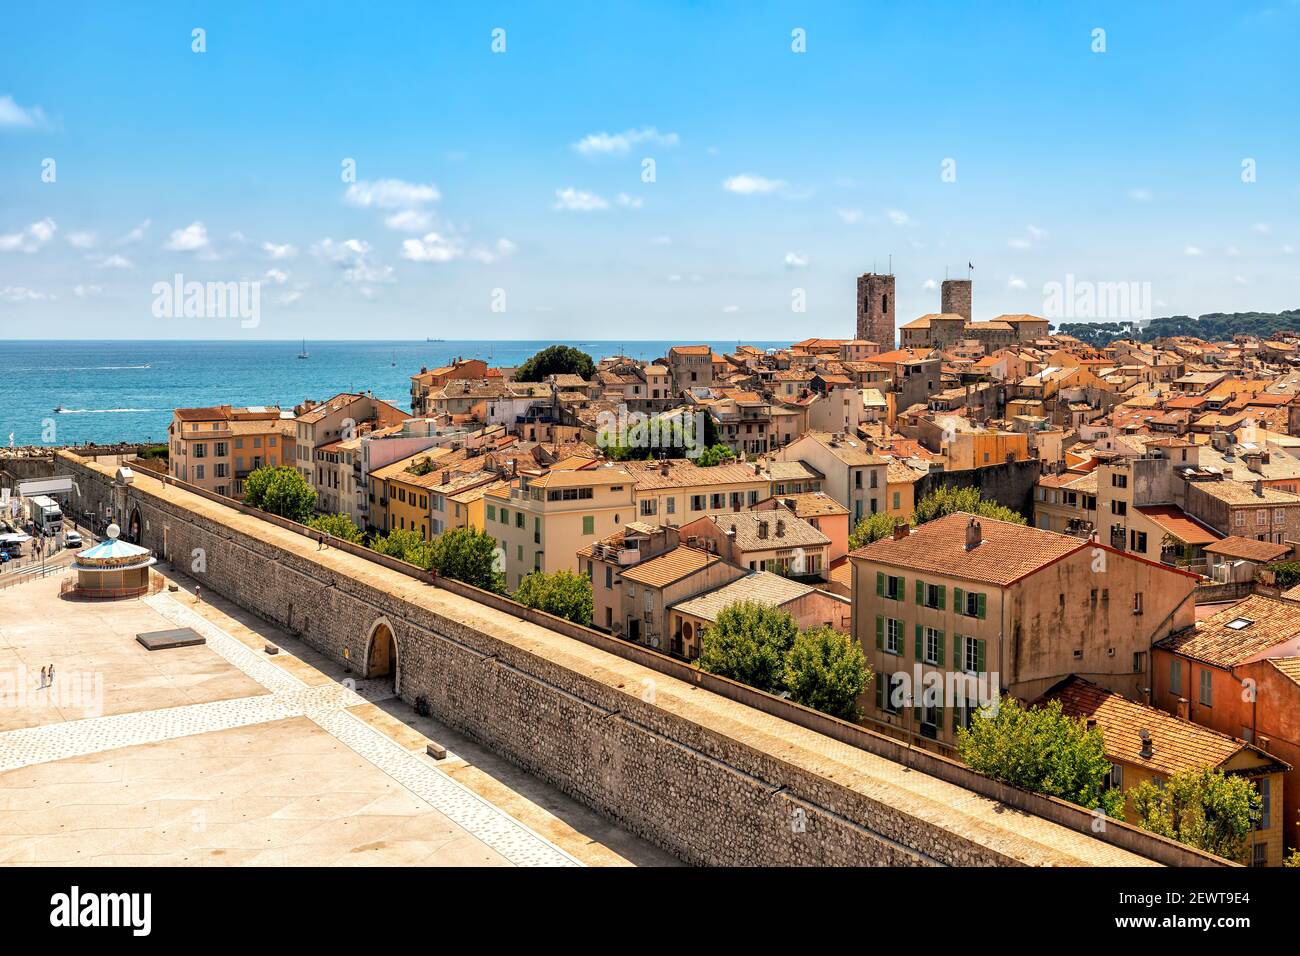 View from above on old town of Antibes under blue sky as Mediterranean sea on background on French Riviera. Stock Photo